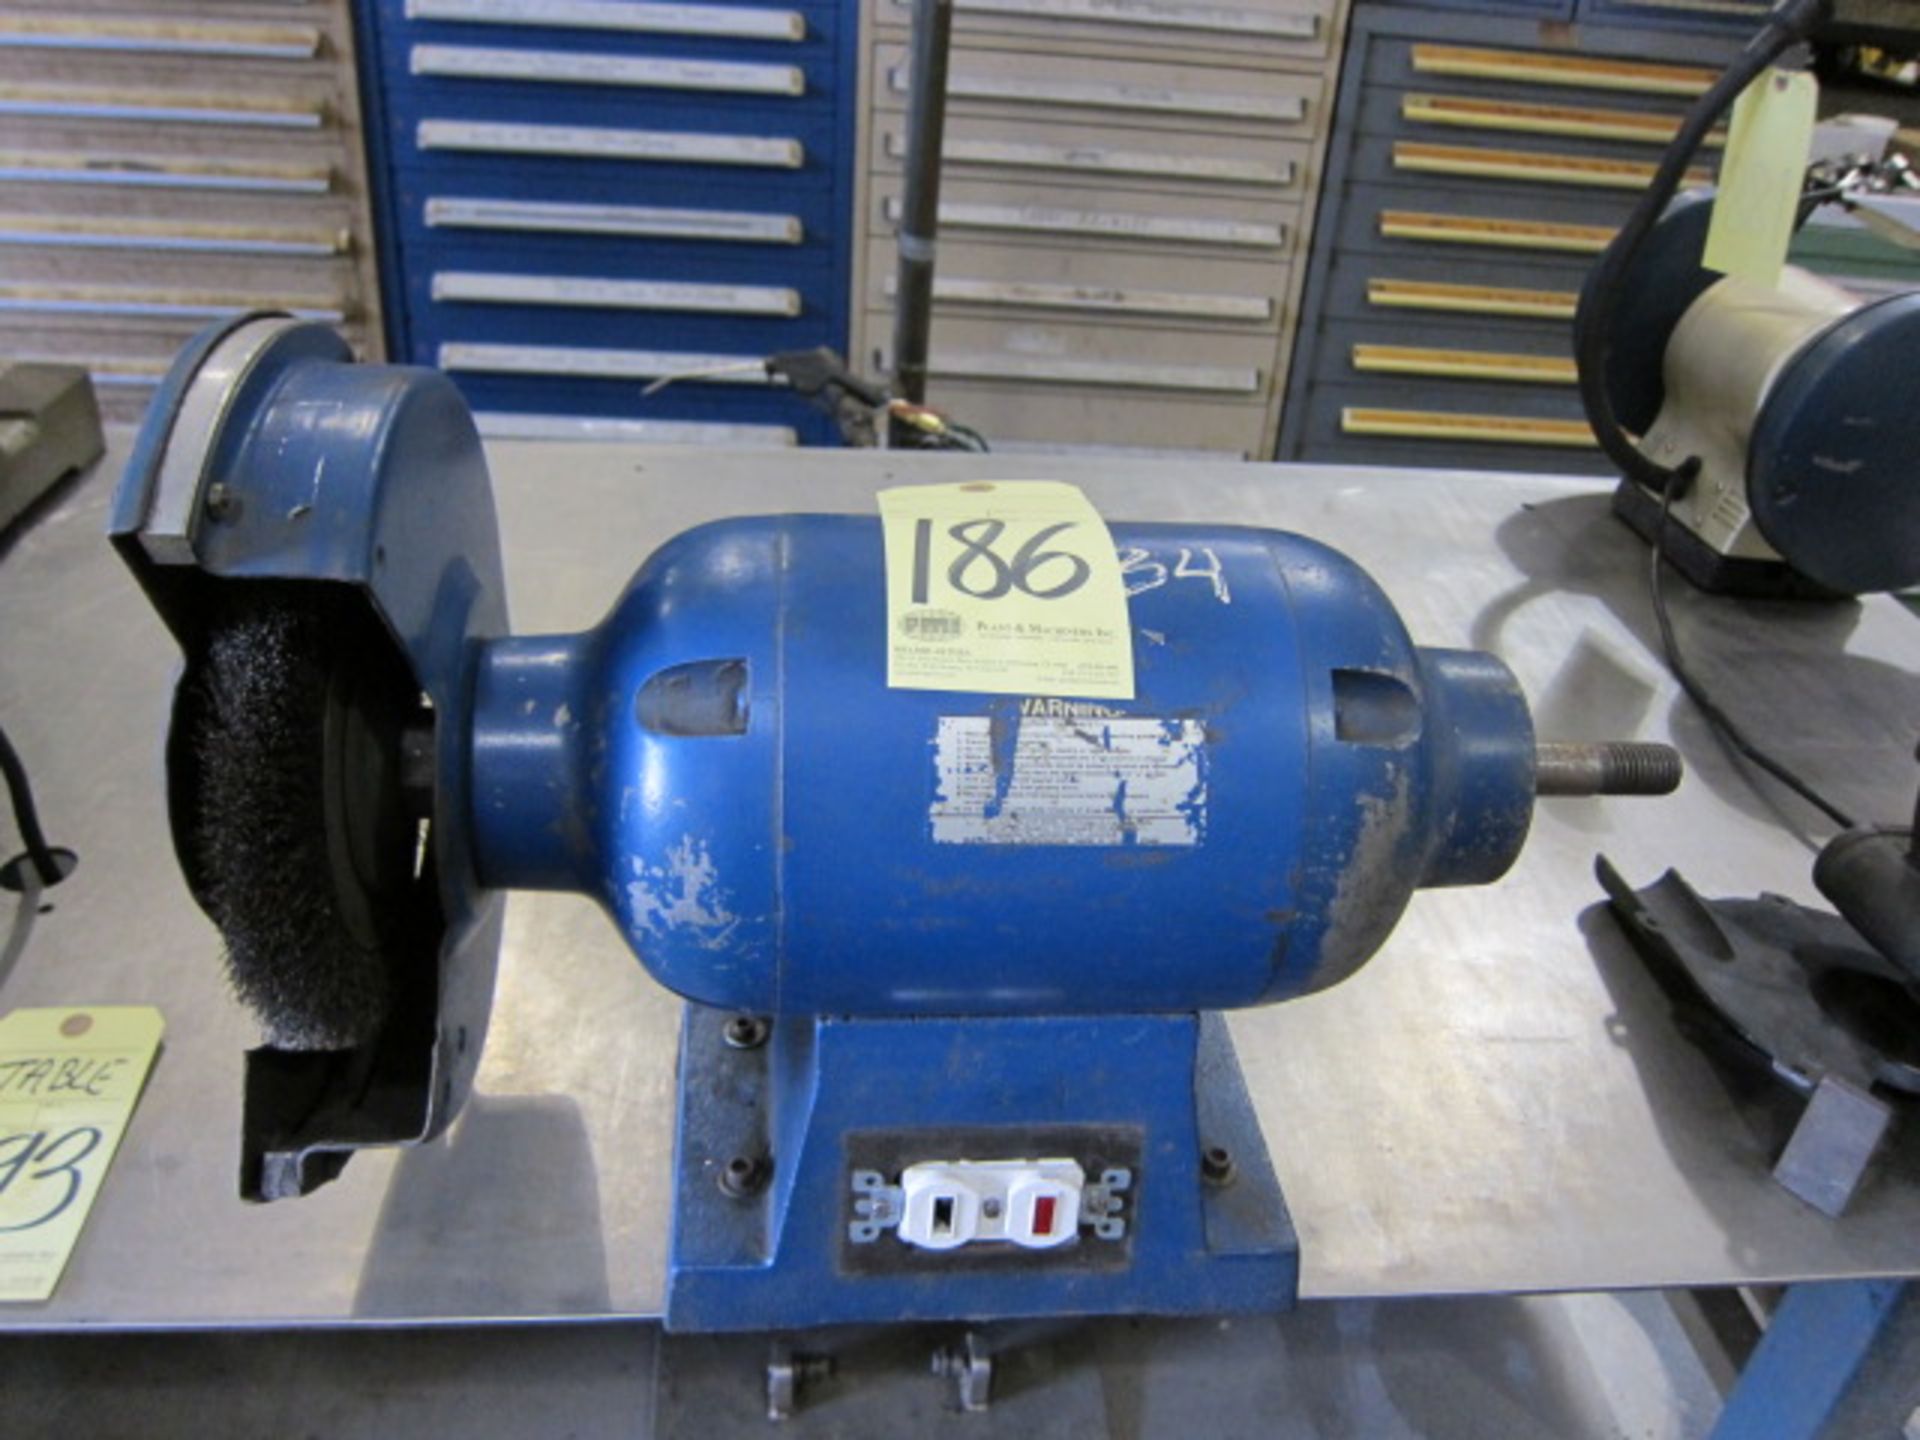 DOUBLE END BENCH GRINDER, 8"